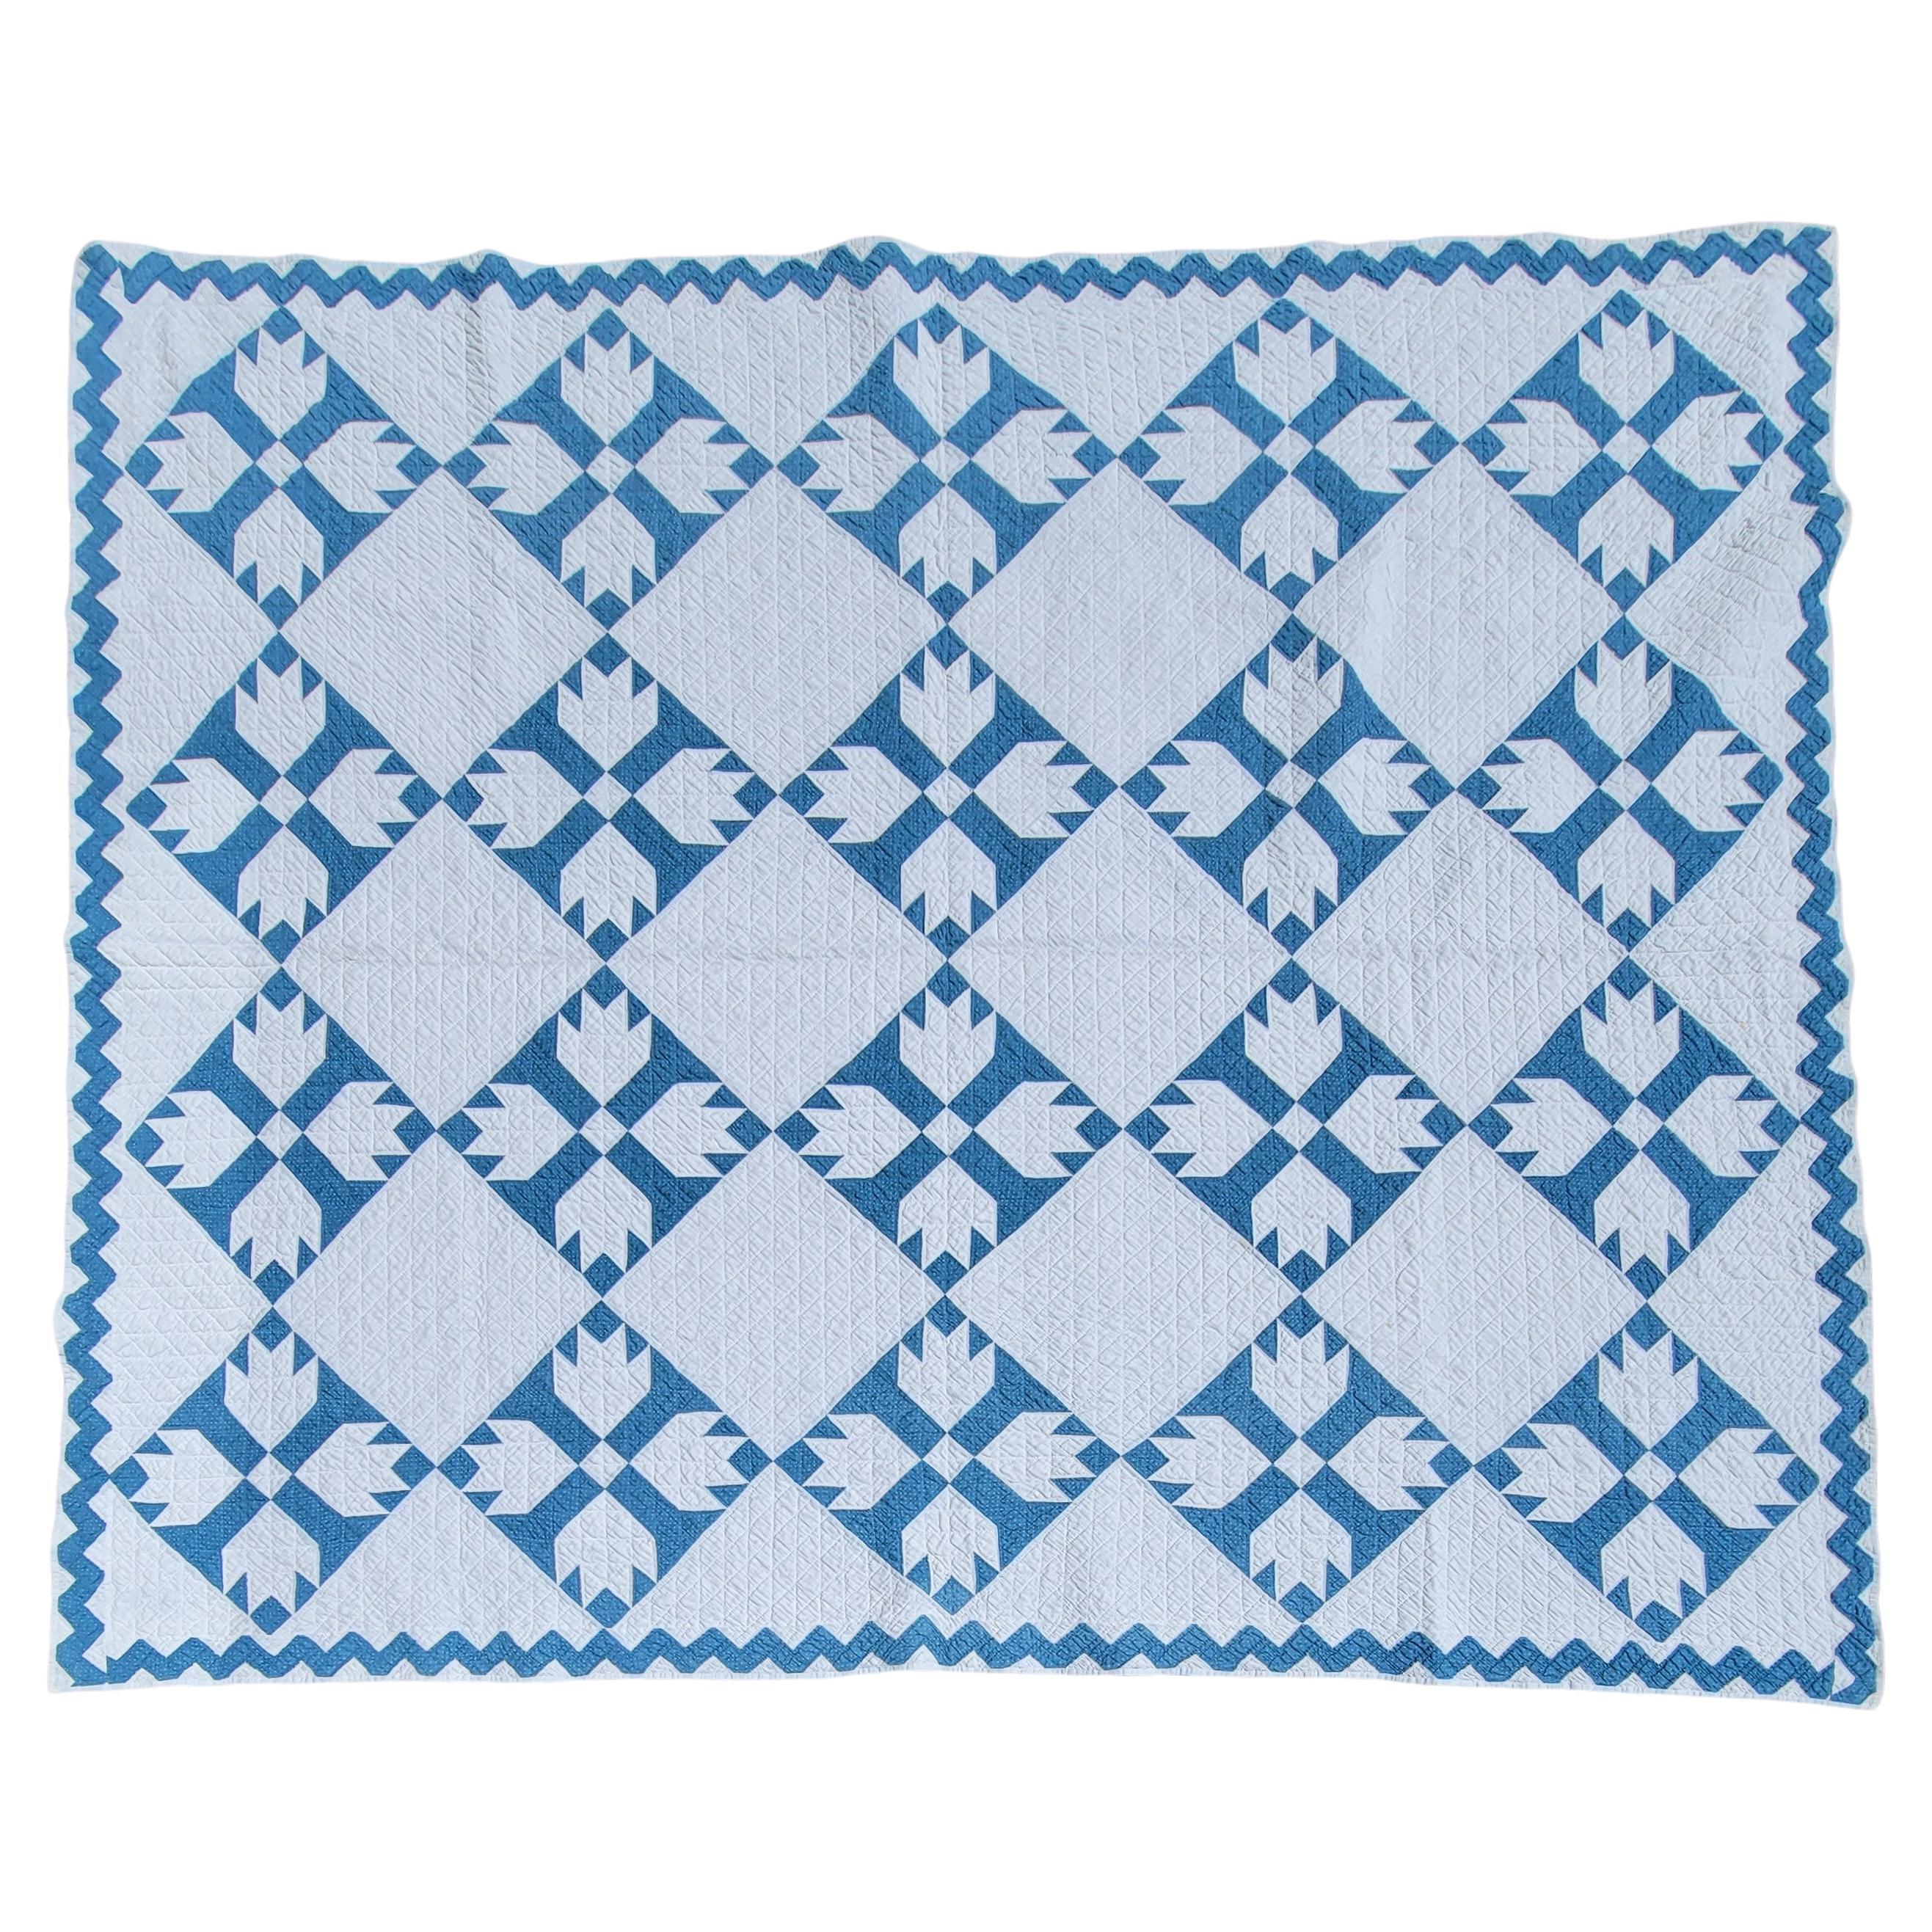 19thc Robin Egg Blue Calico Bear Paw Quilt For Sale